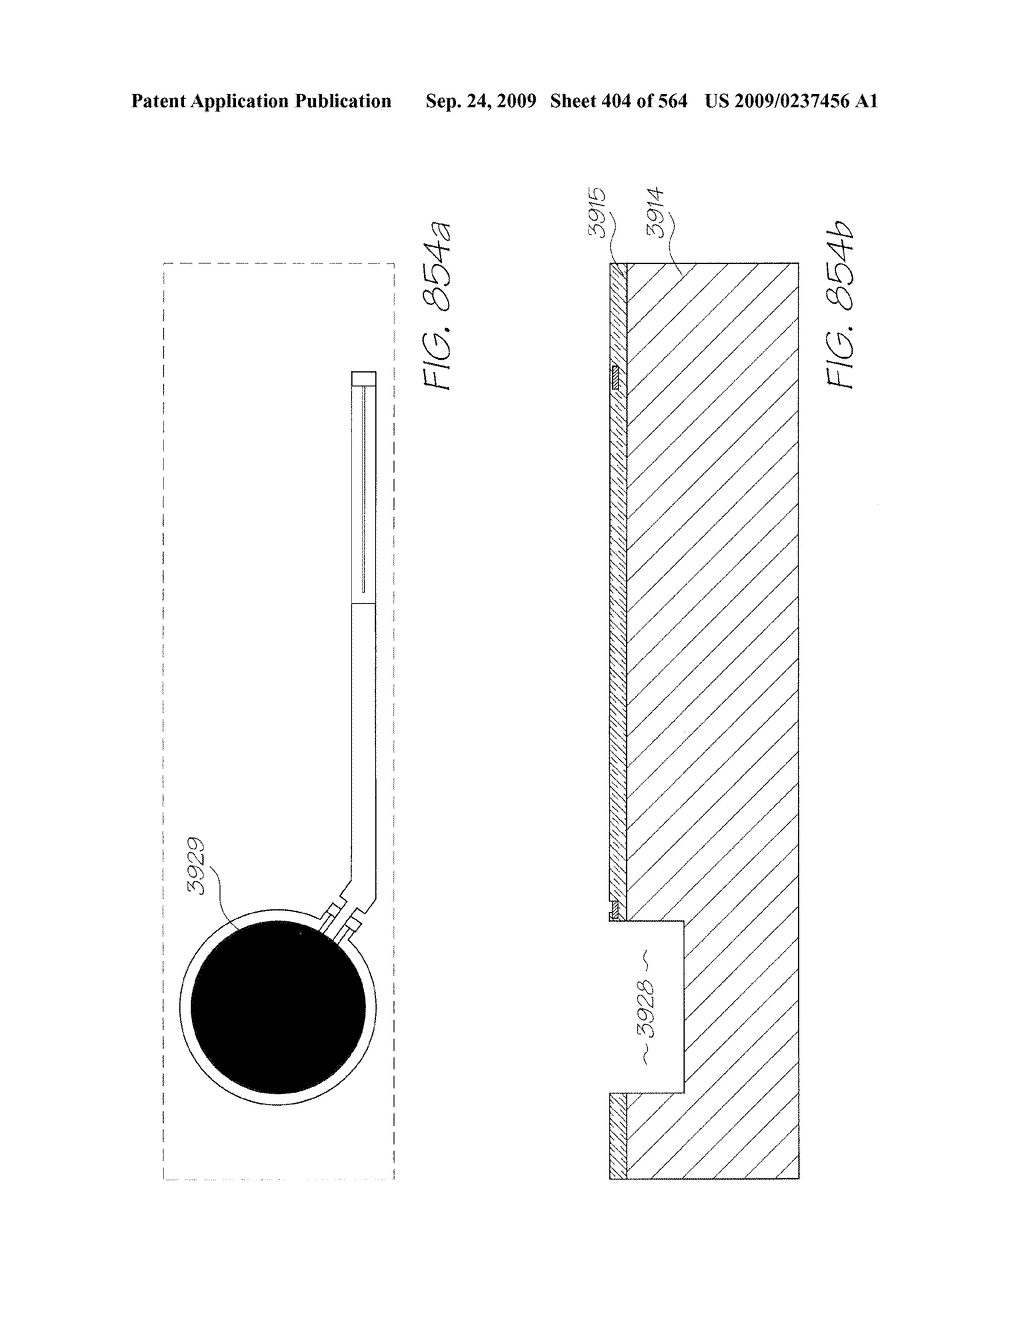 Inkjet Printhead With Paddle For Ejecting Ink From One Of Two Nozzles - diagram, schematic, and image 405